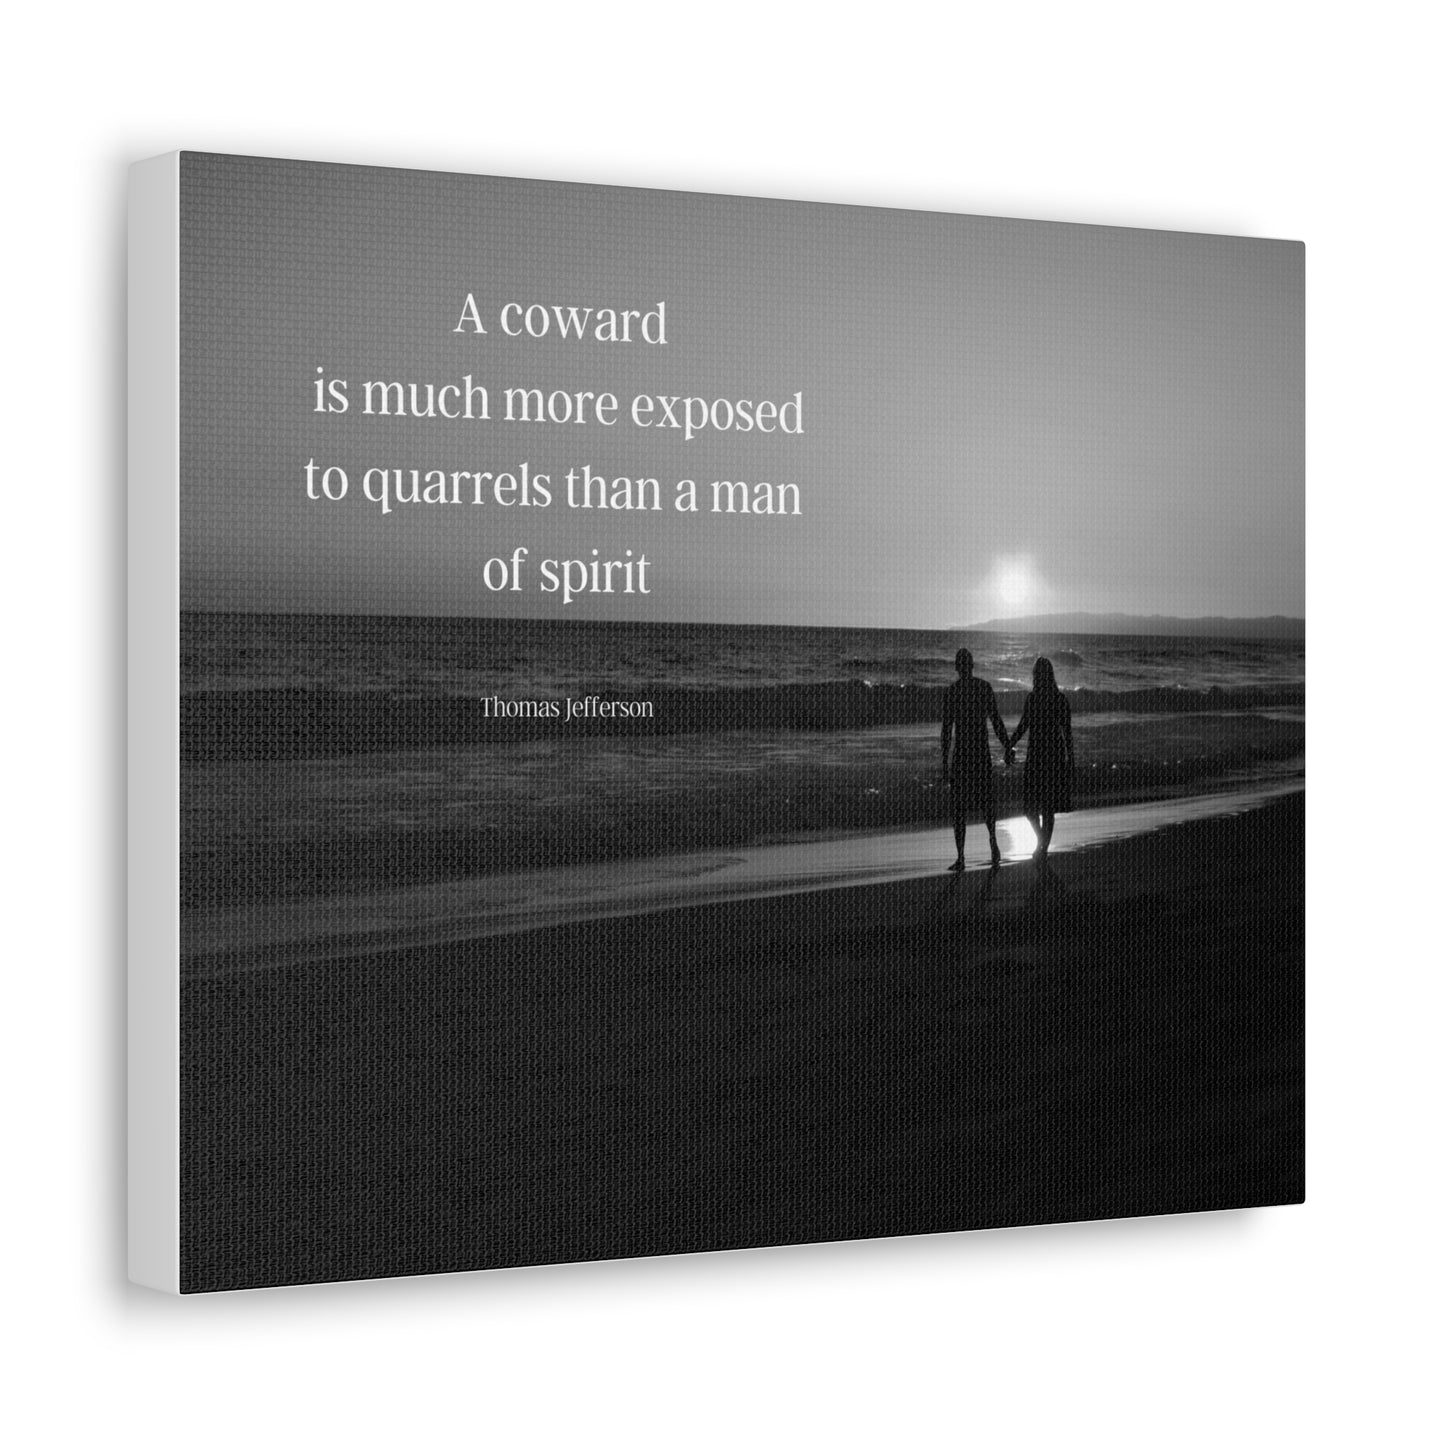 Thomas Jefferson Quote 6, Canvas Art, Horizontal Beach Print in Black and White, 3rd President of the United States, Ocean Art, Sunset, Nature, Political Art, Canvas Prints, Presidential Quotes, Inspirational Quotes